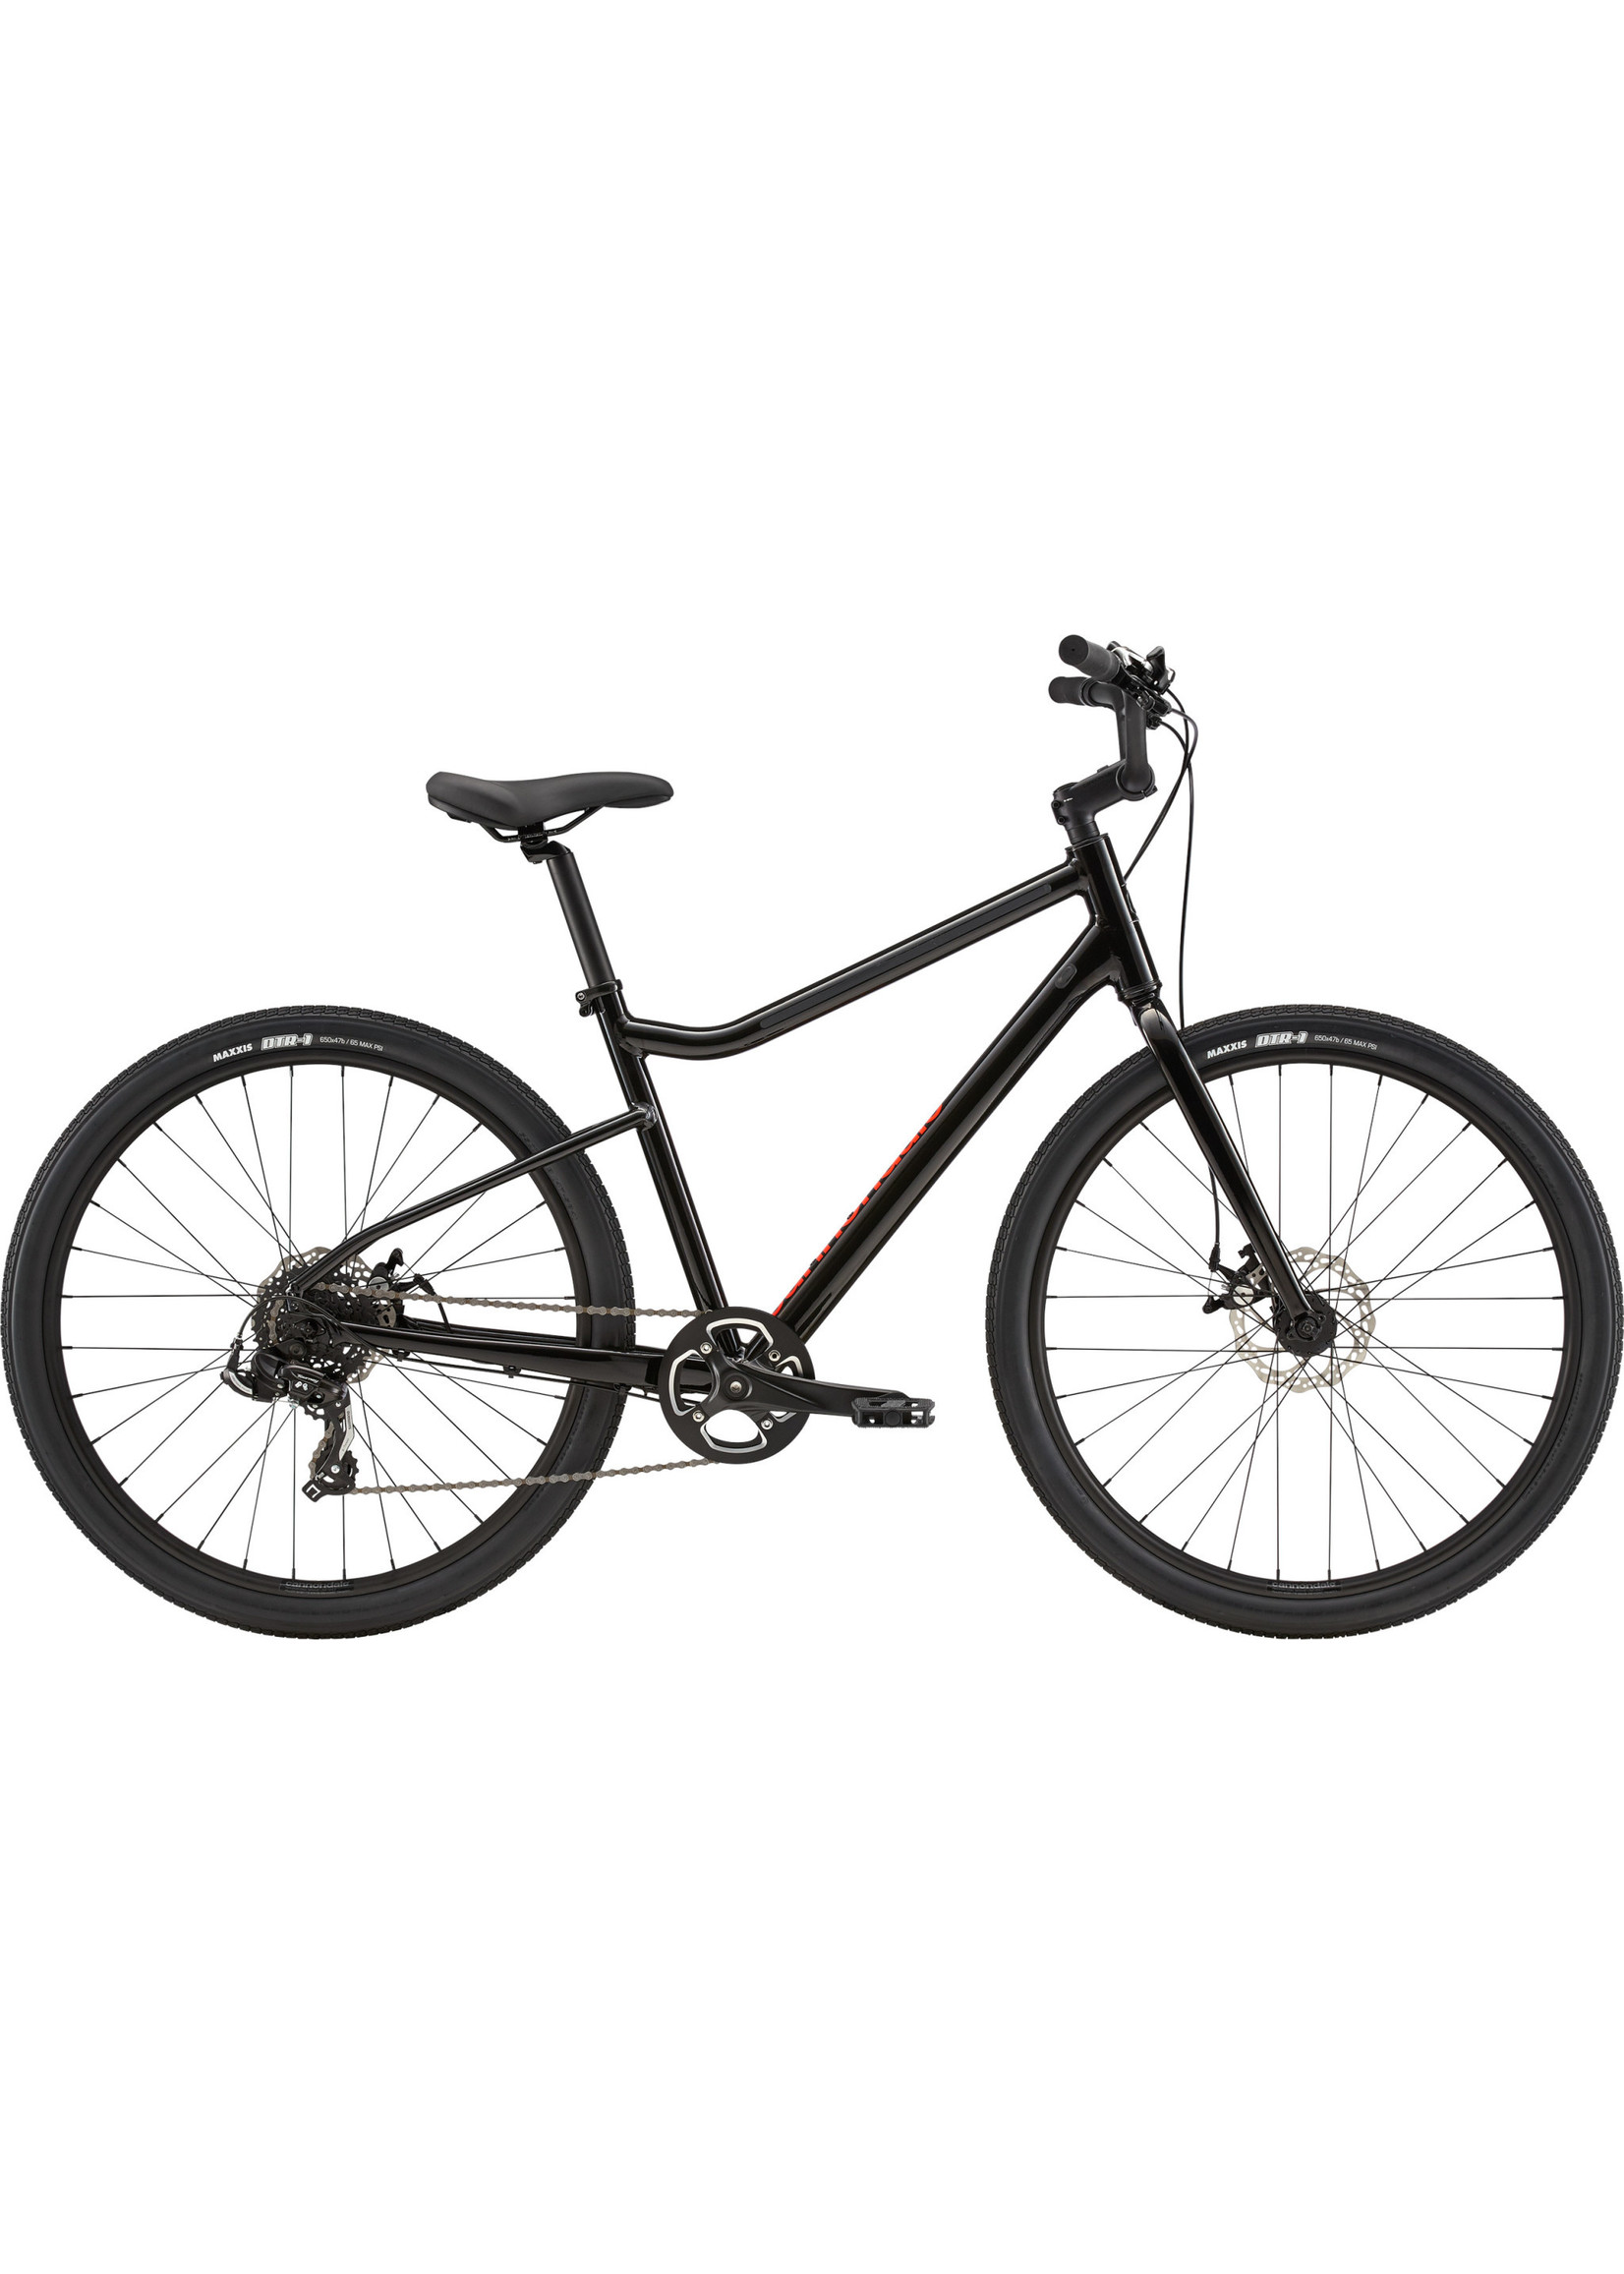 Cannondale Cannondale Treadwell 3, BLK MD - Black, Medium